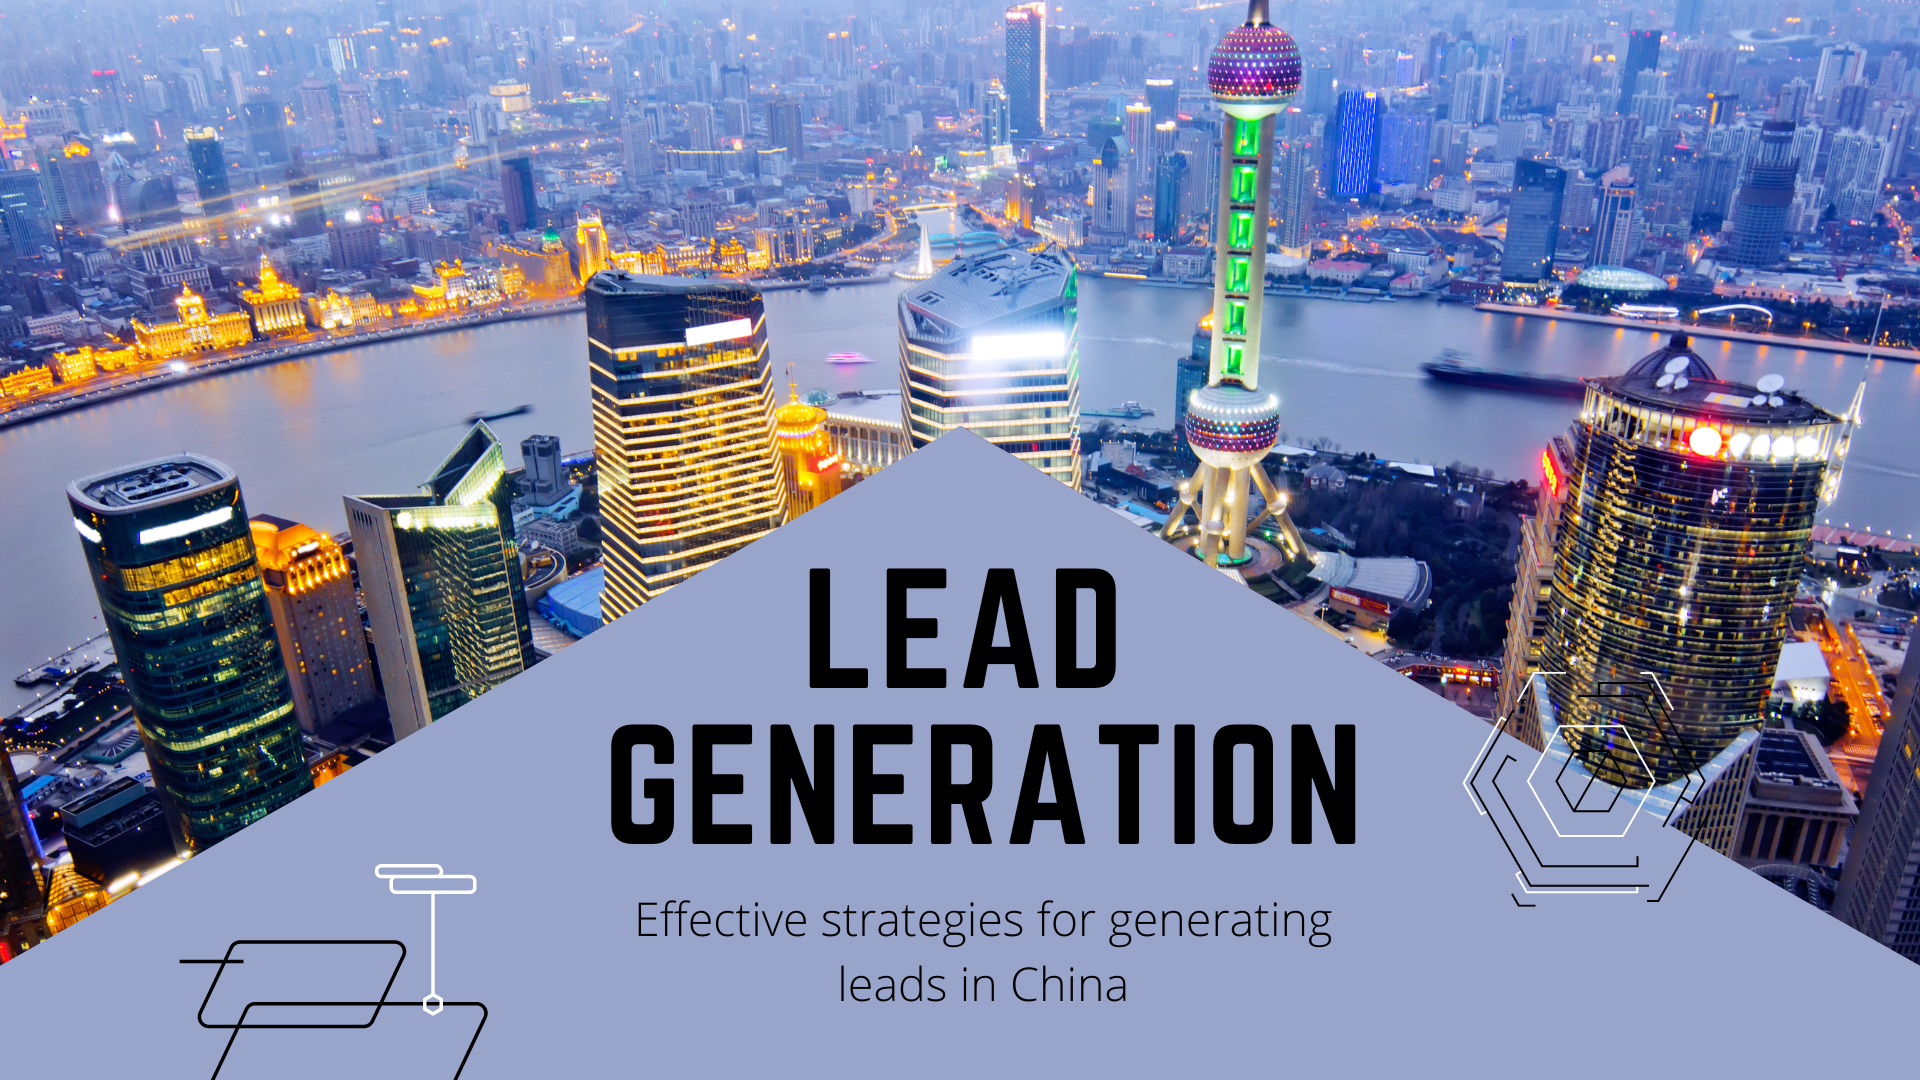 Lead generation in China